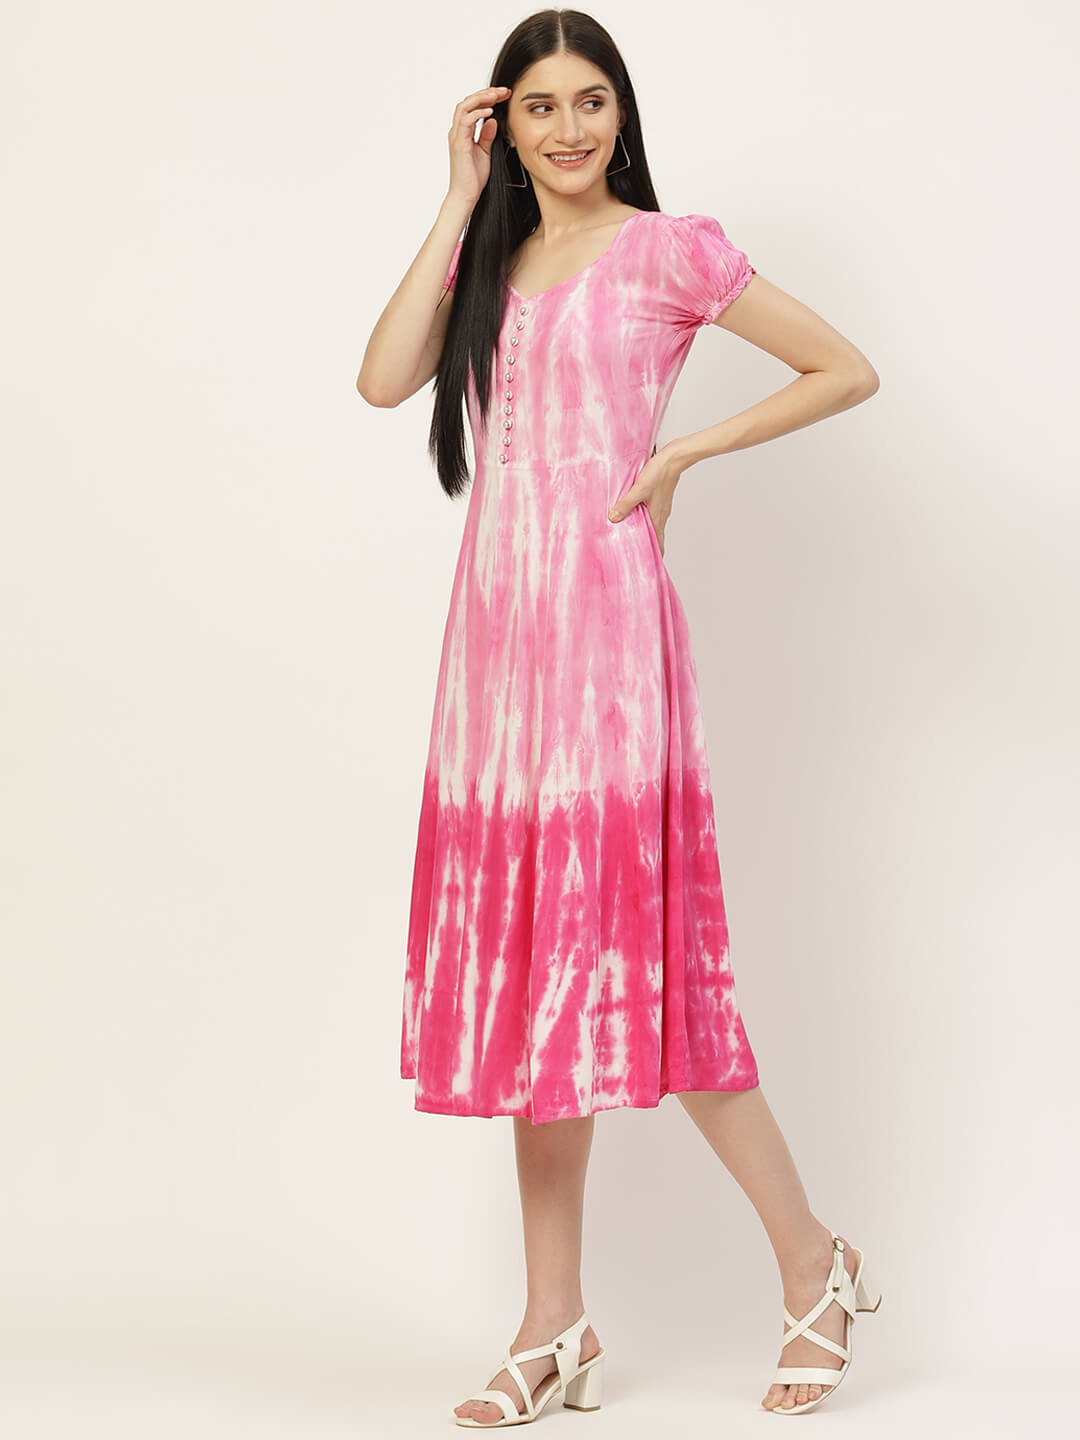 Tie And Dye Dresses - Buy Tie And Dye Dresses online in India